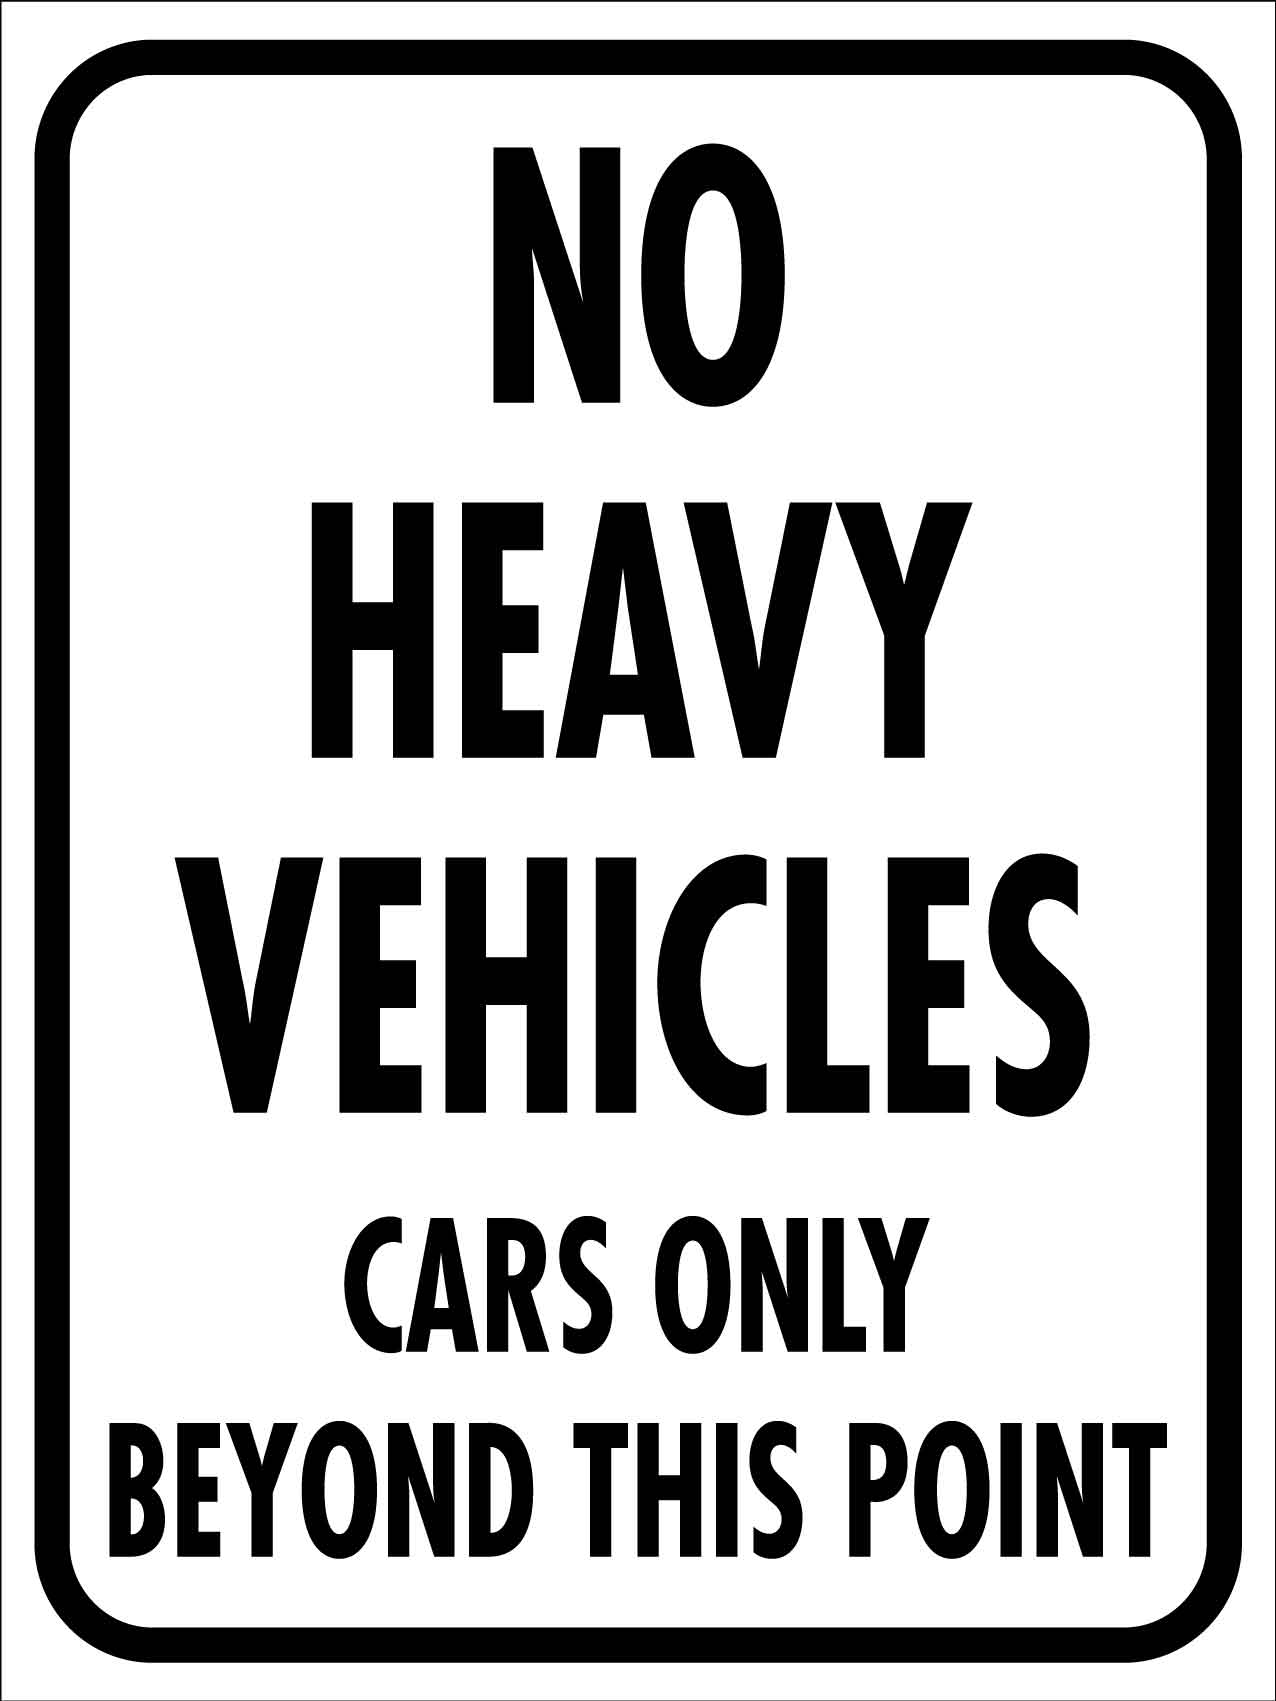 No Heavy Vehicles Cars Only Beyond This Point Sign